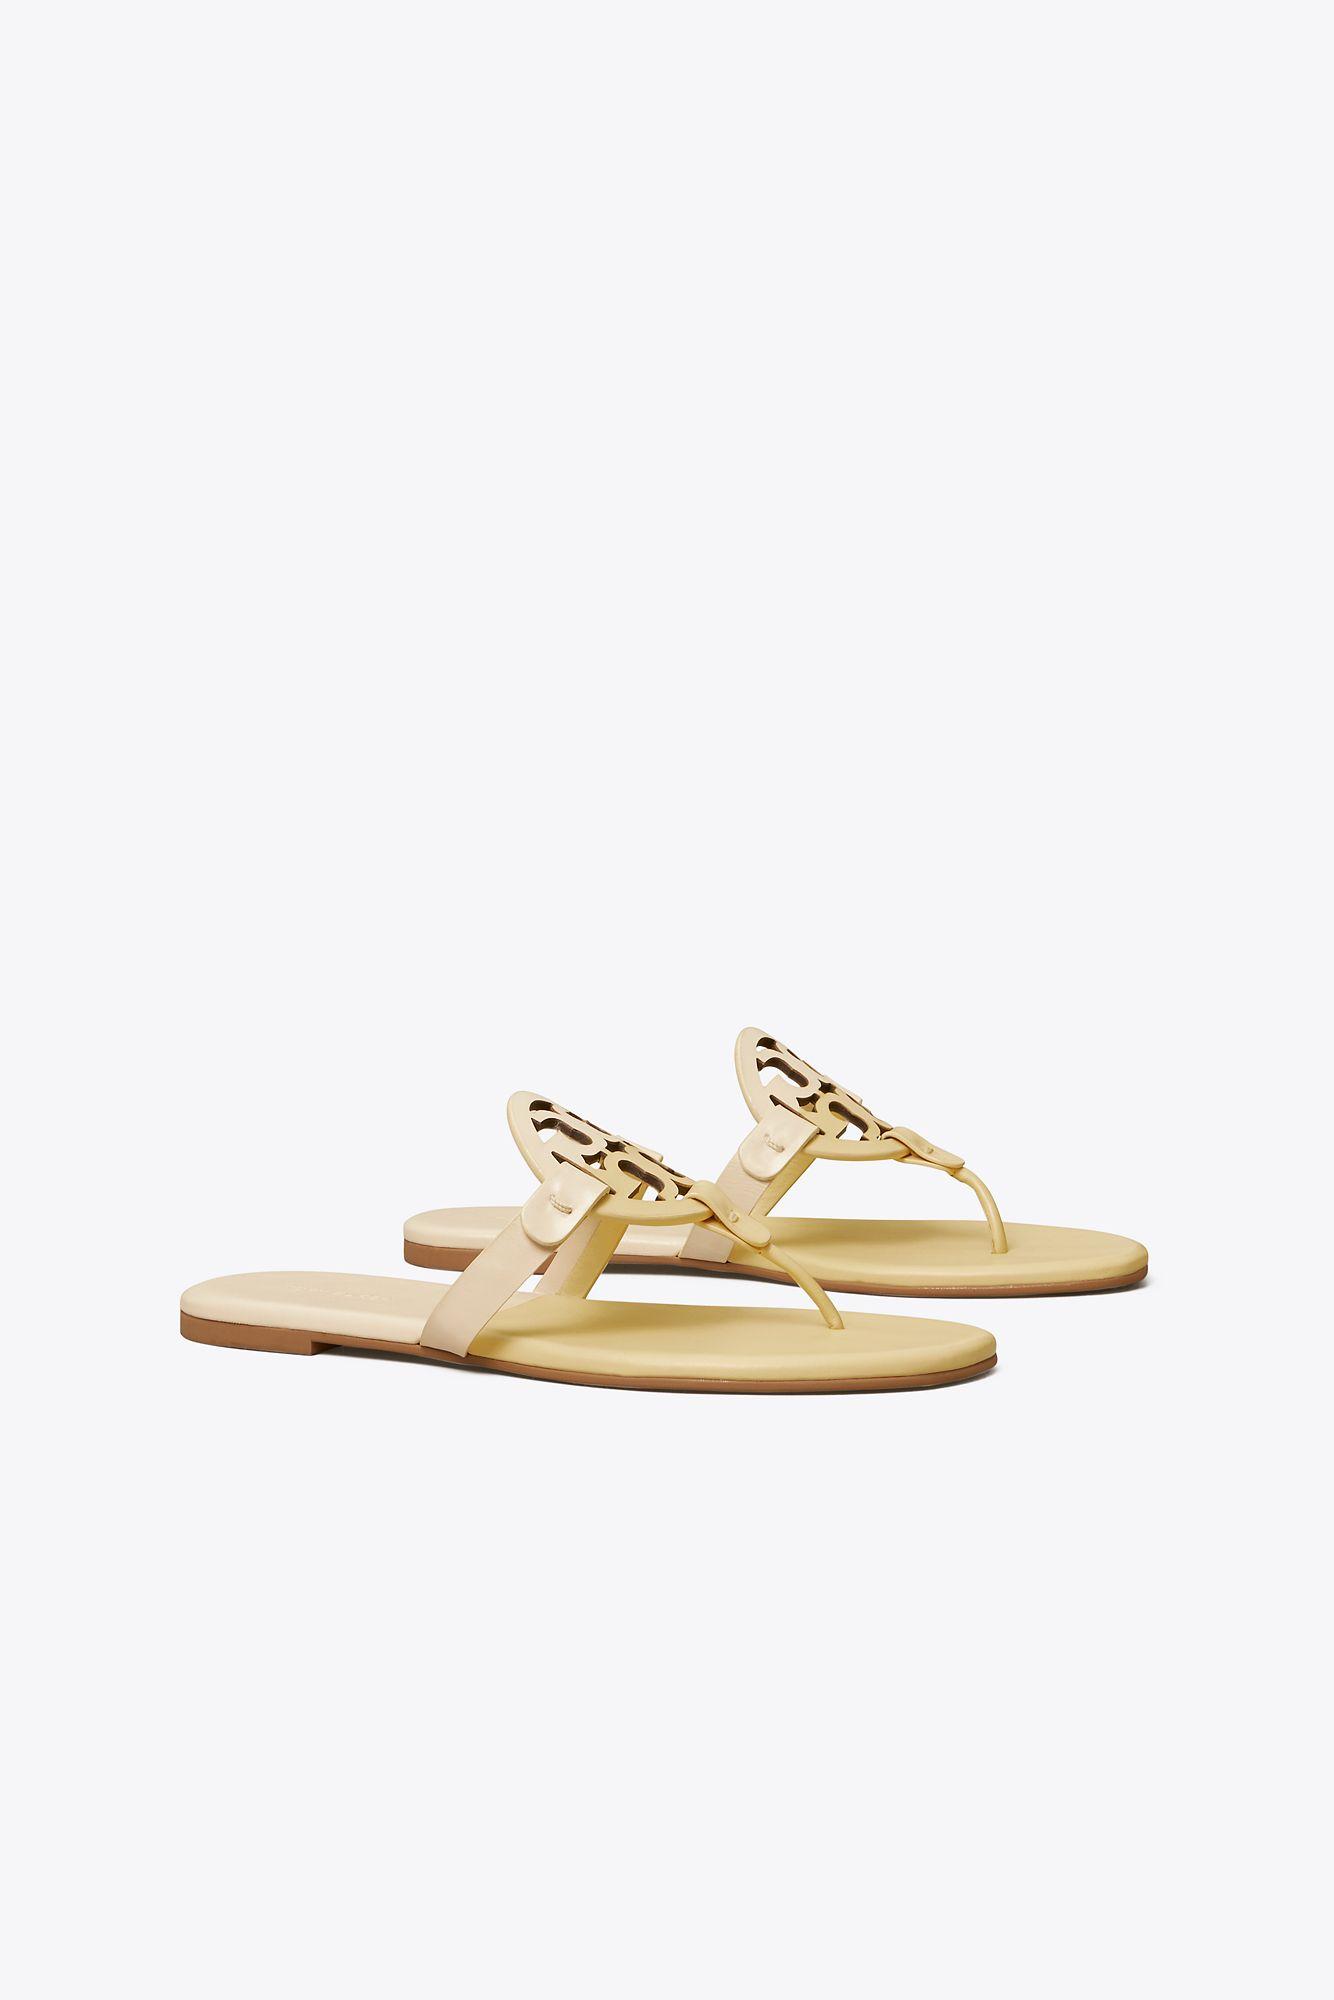 Tory Burch Miller Soft Bicolor Sandal in White | Lyst